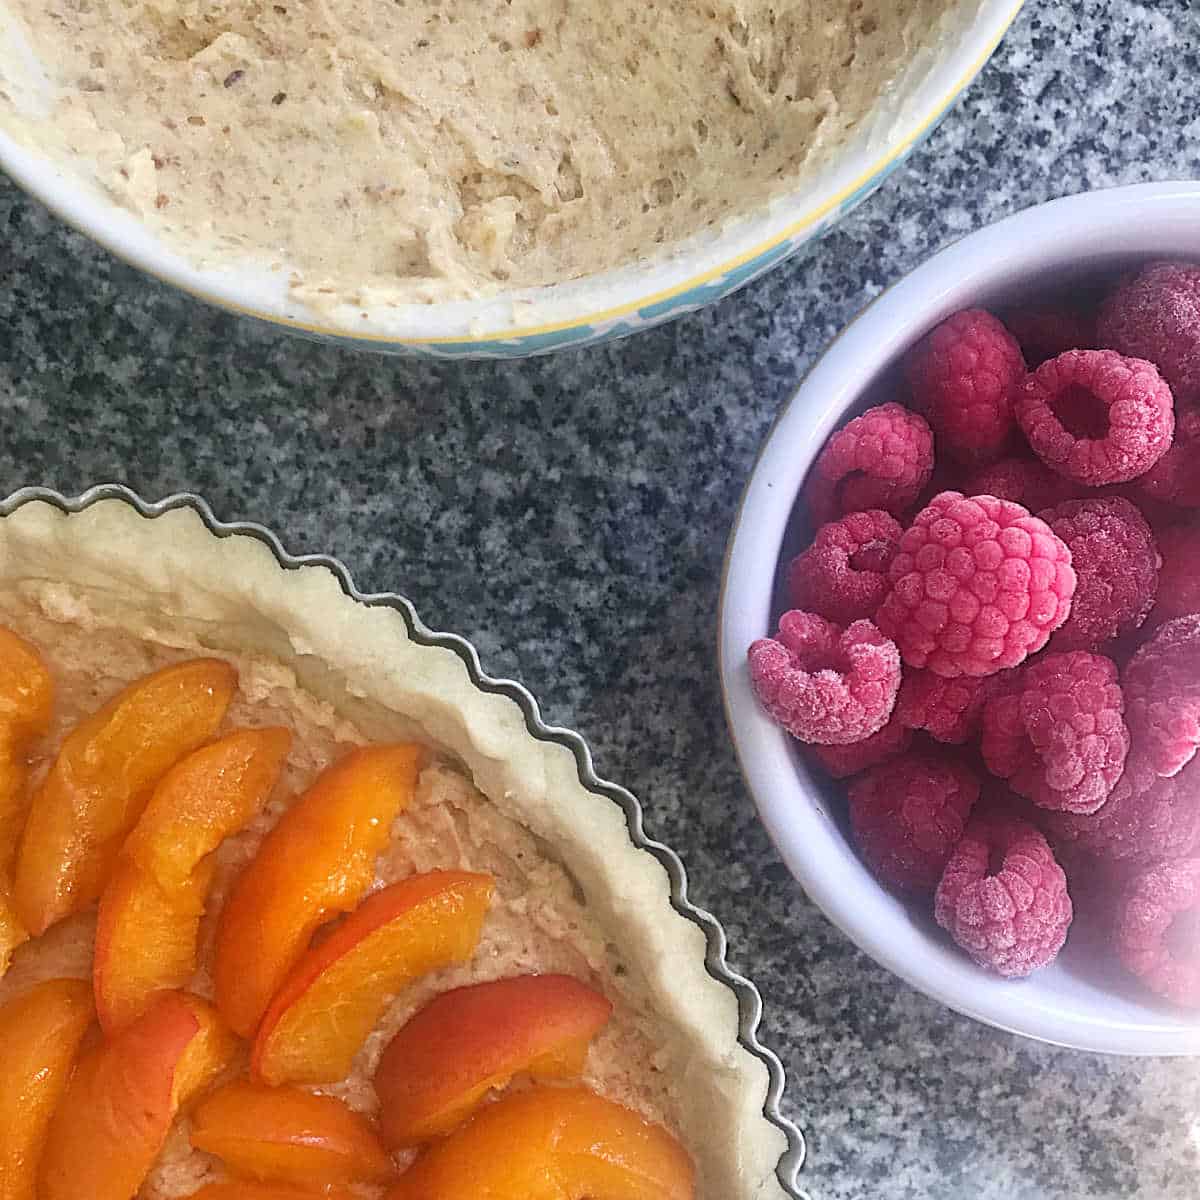 Partial view of crust with apricots, bowl with frangipane, raspberries in bowl.